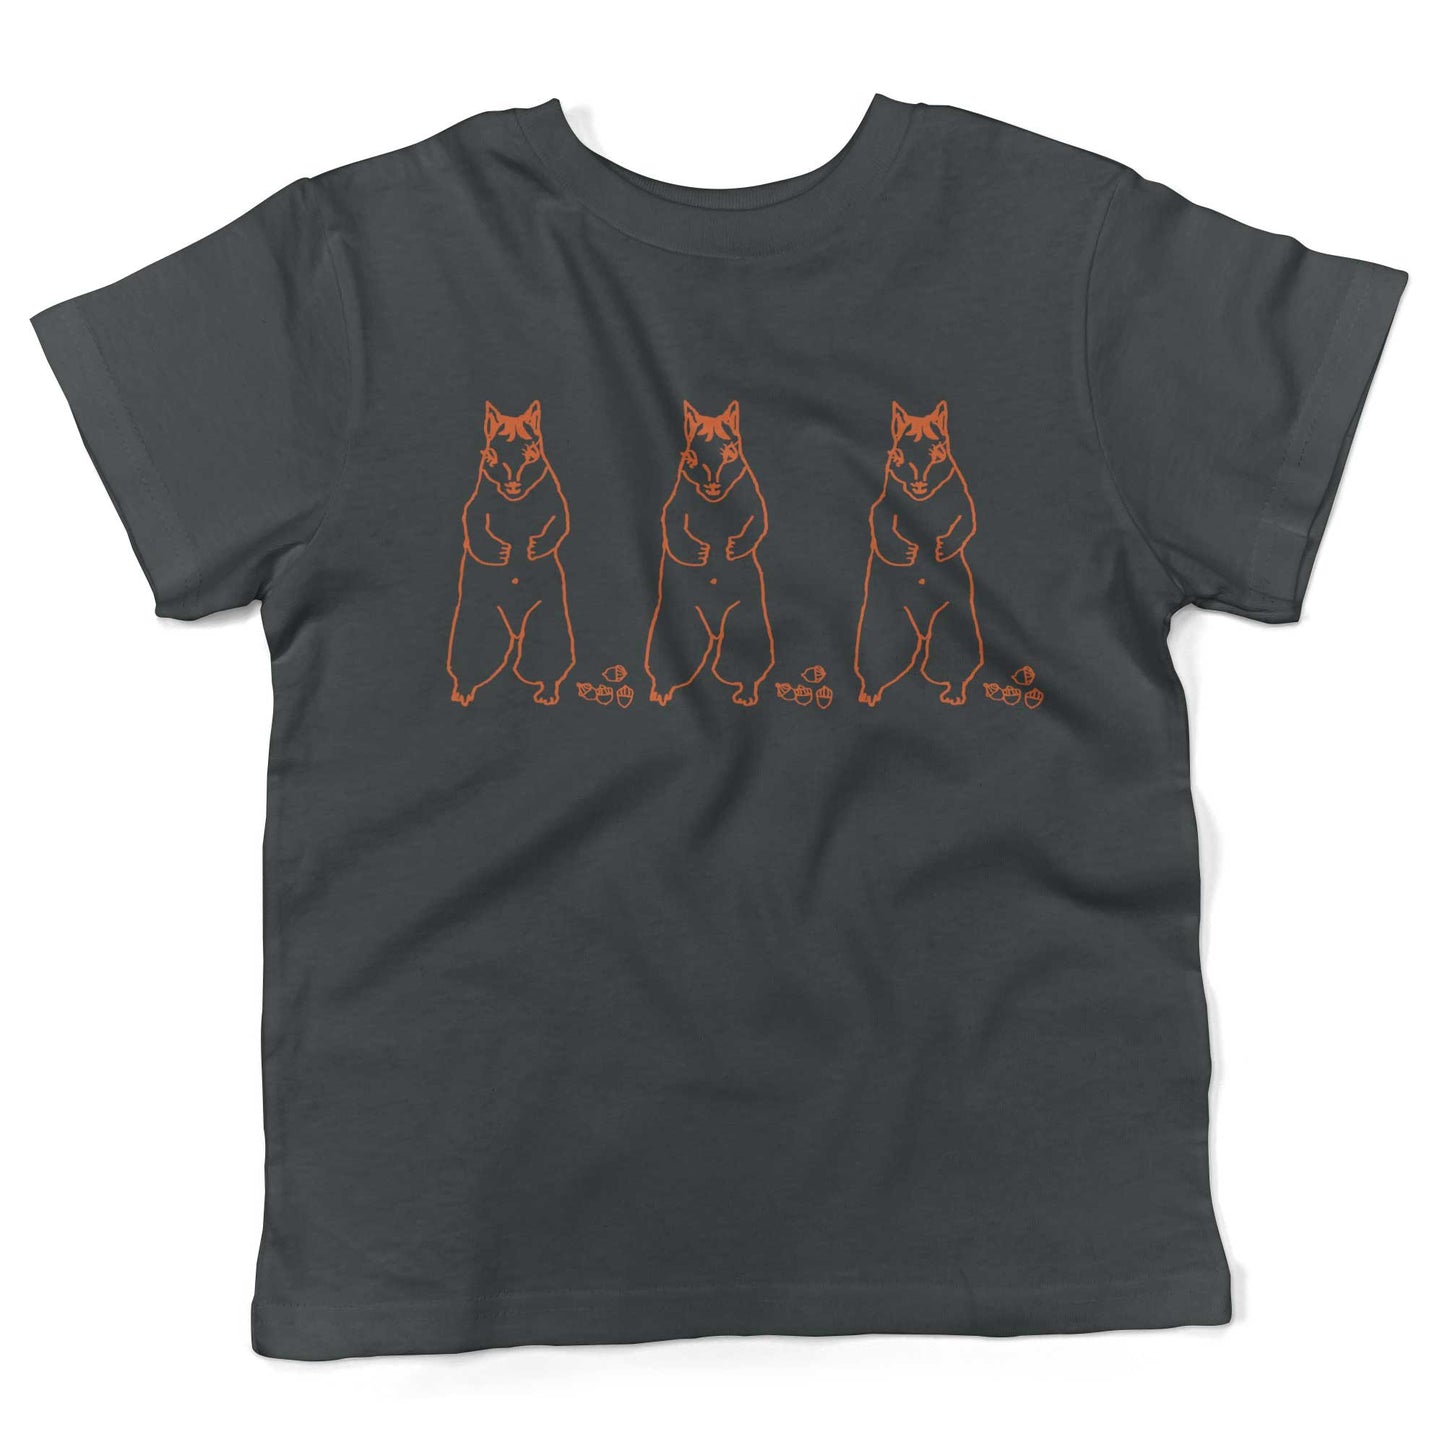 Cute Dancing Squirrels With Nuts Toddler Shirt-Asphalt-2T